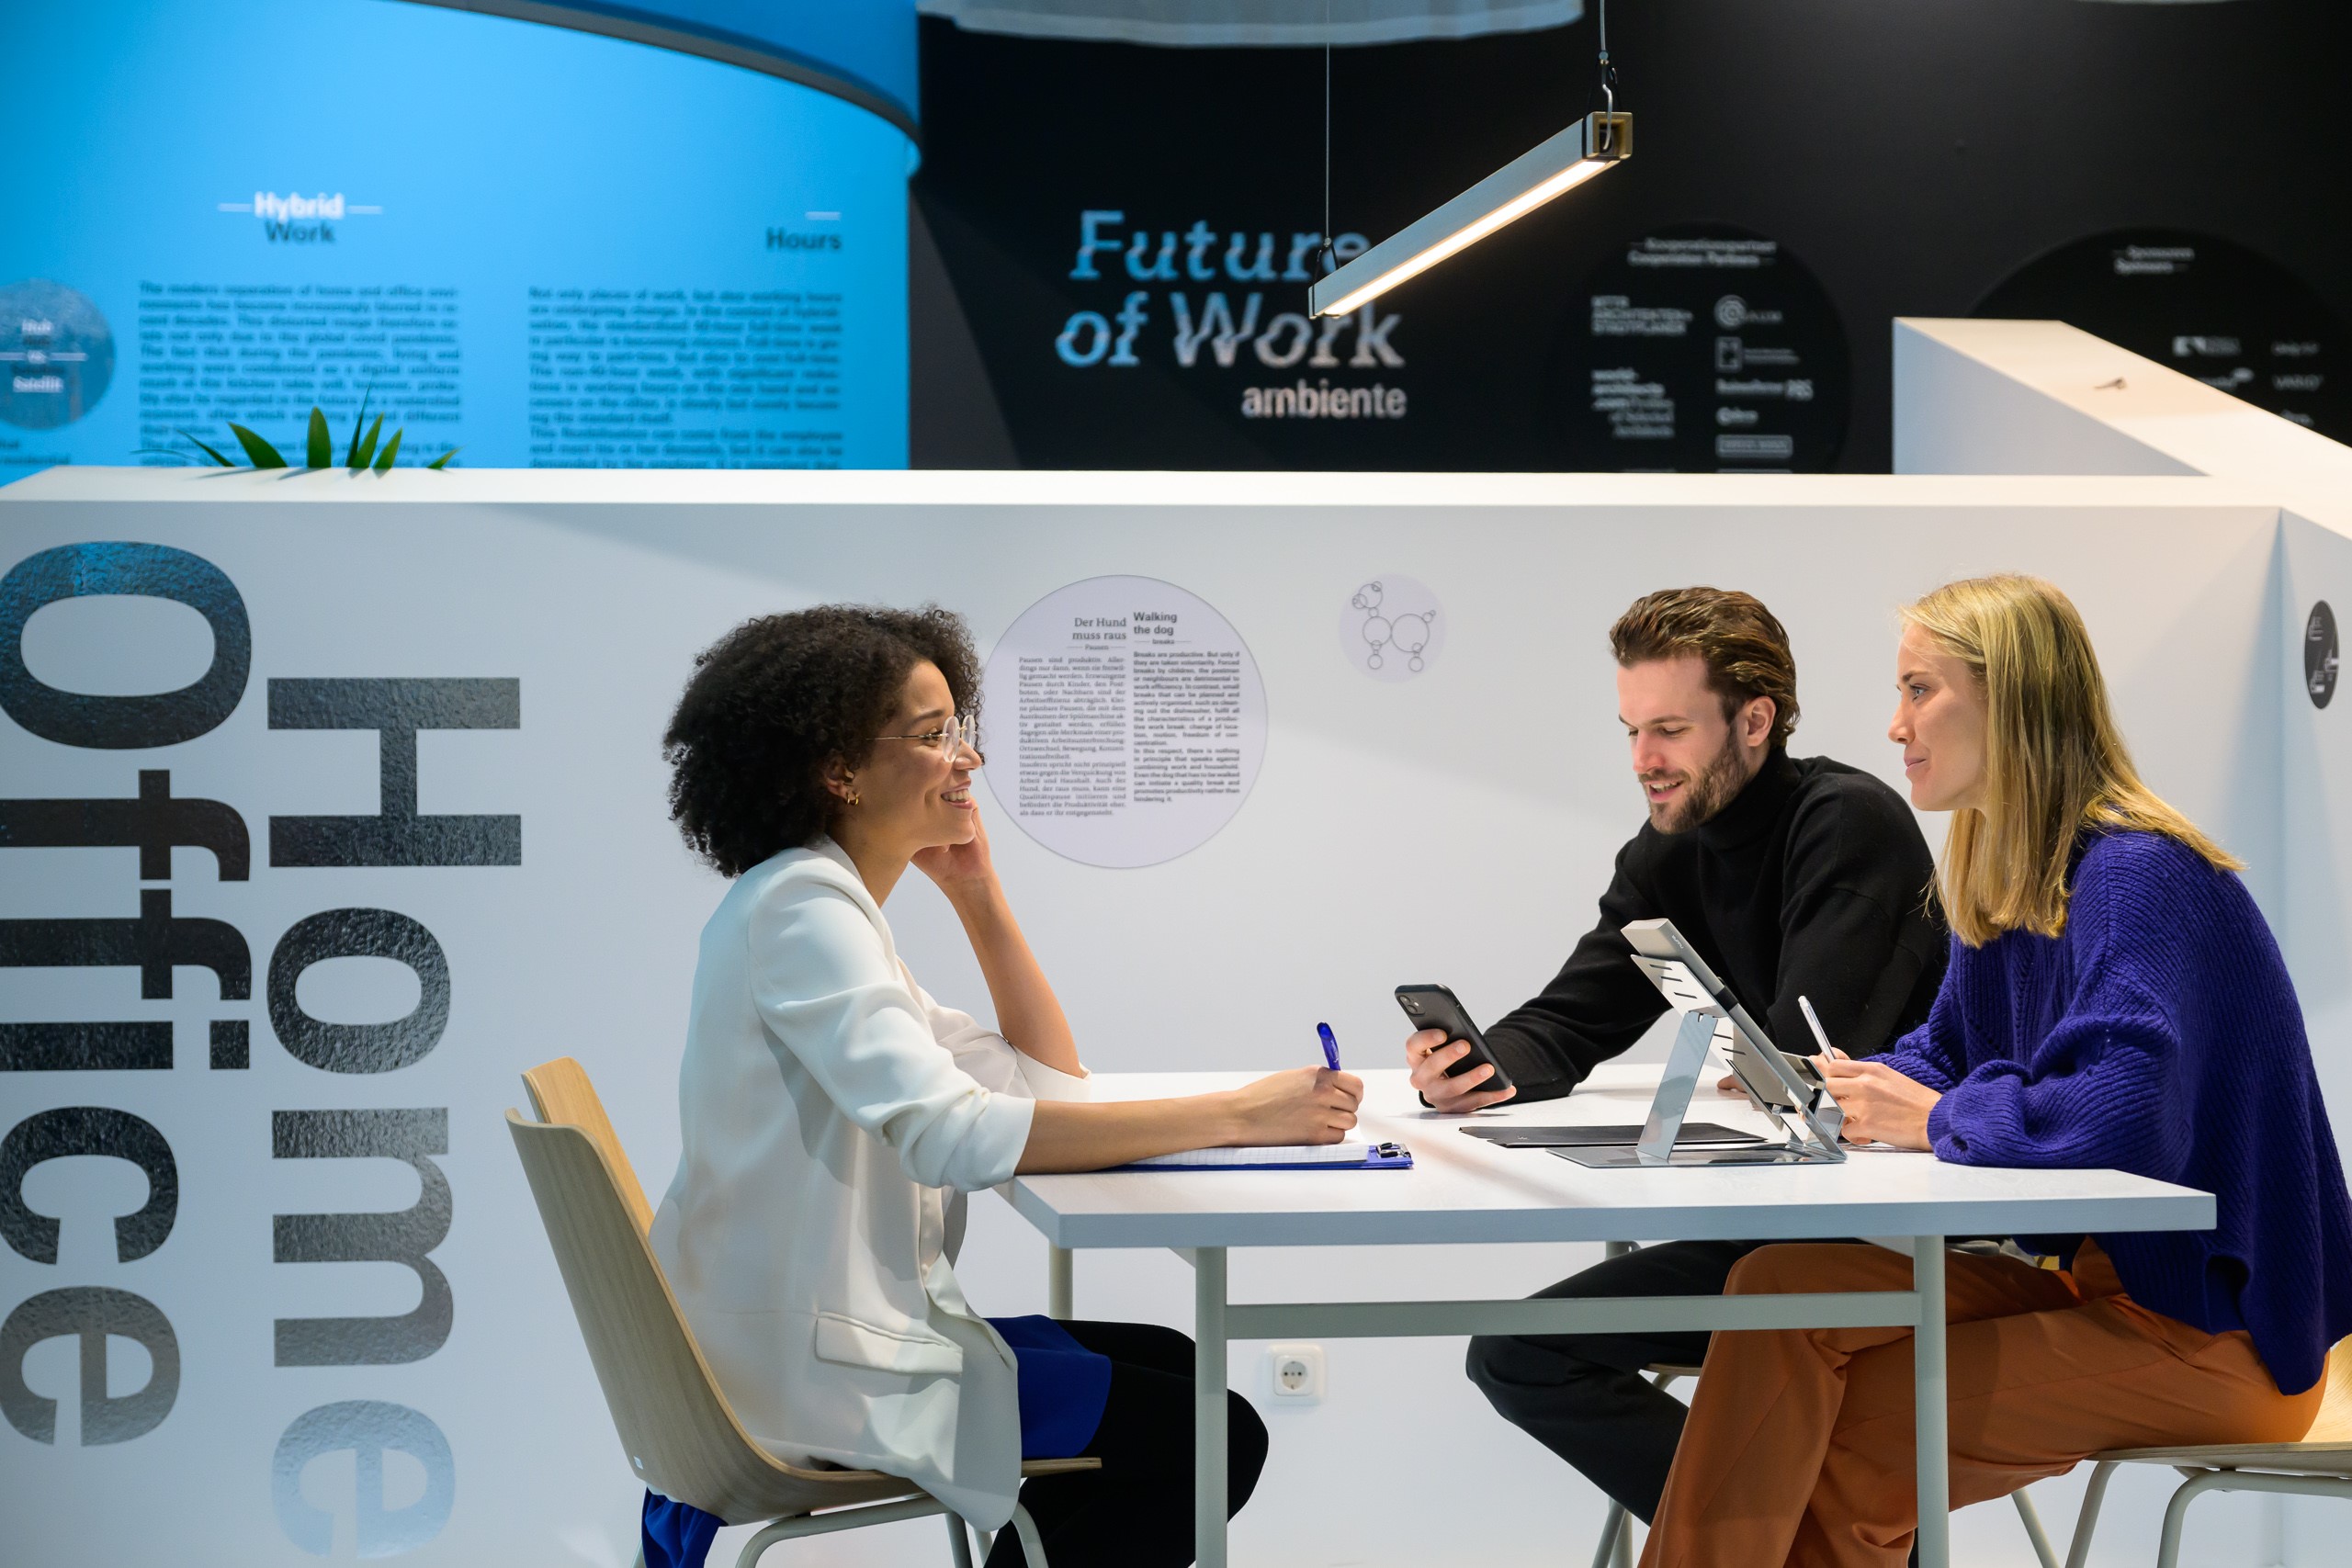 What will the office of the future look like? The Future of Work area shows suppliers and solutions for the working world of tomorrow.